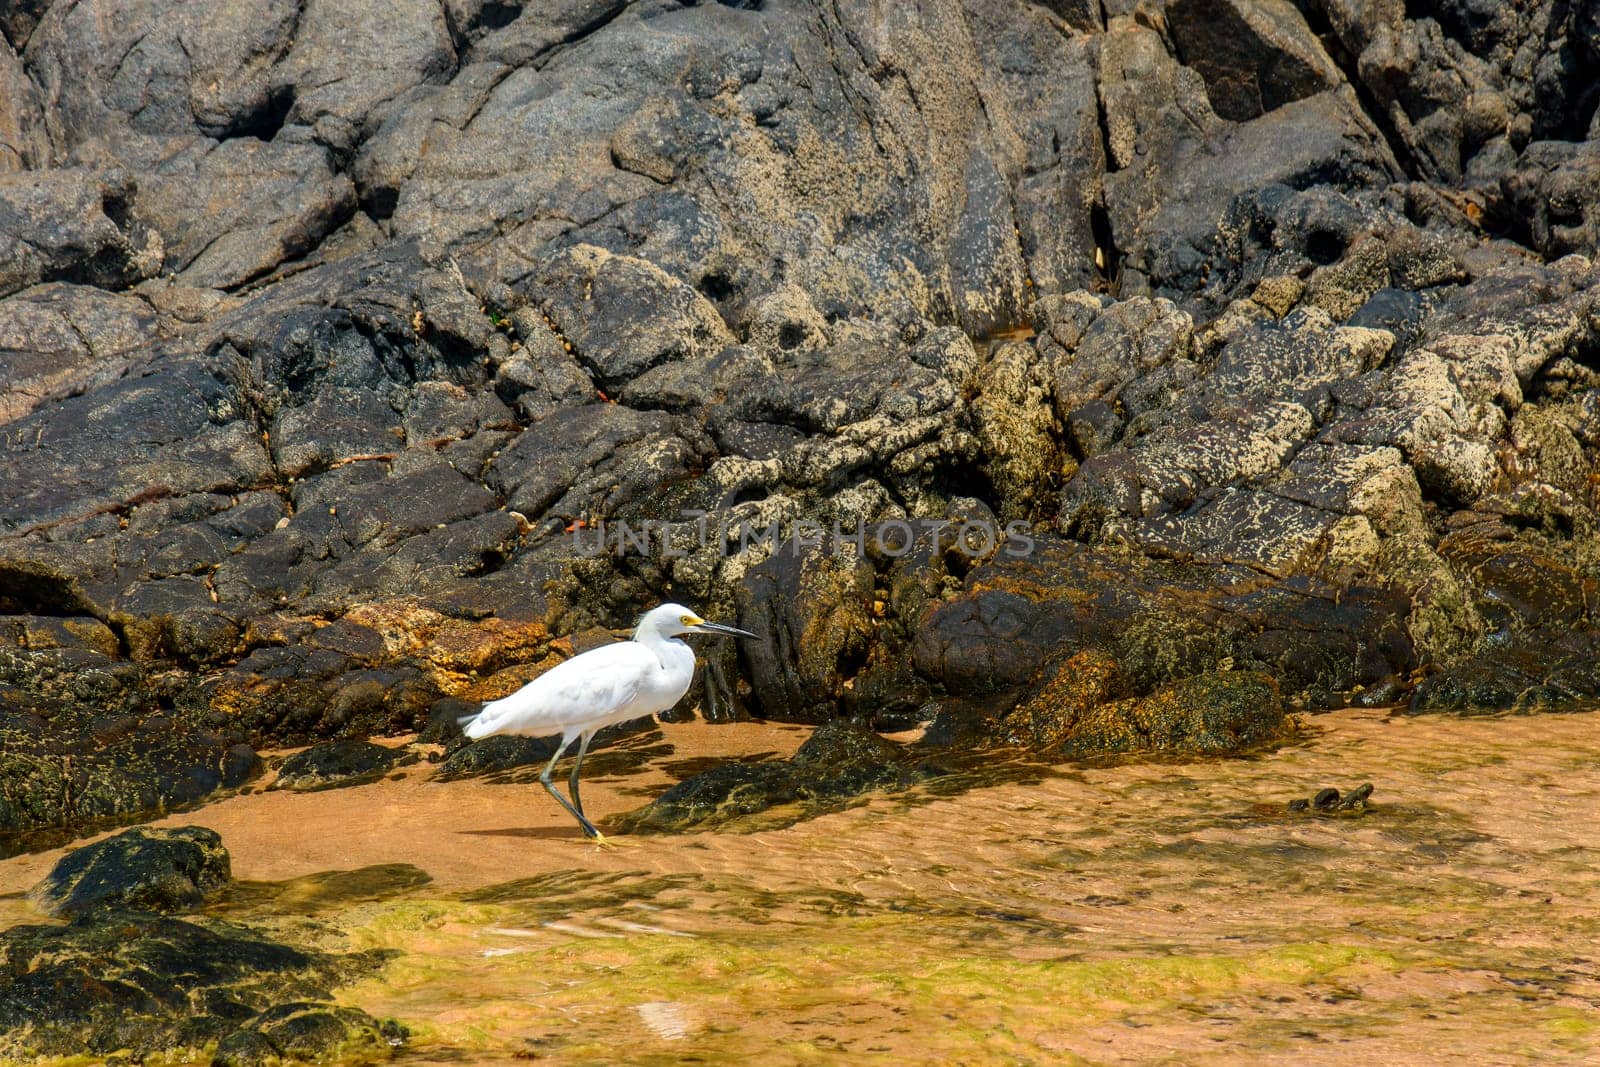 White egret walking in the water by Fred_Pinheiro